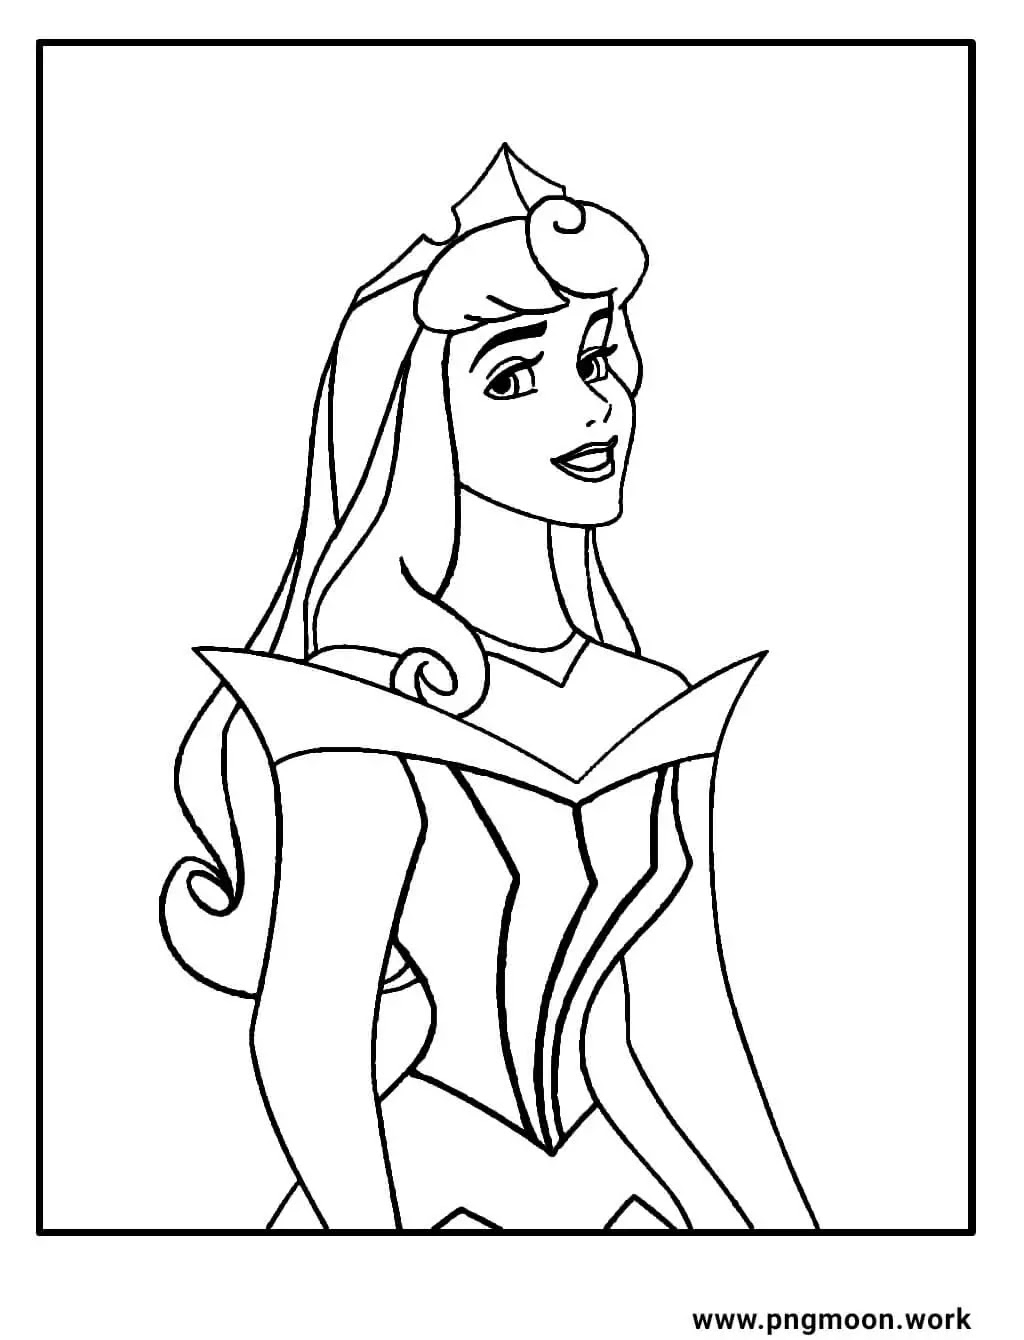 Aurora Coloring Pages   Pngmoon  PNG images, Coloring Pages